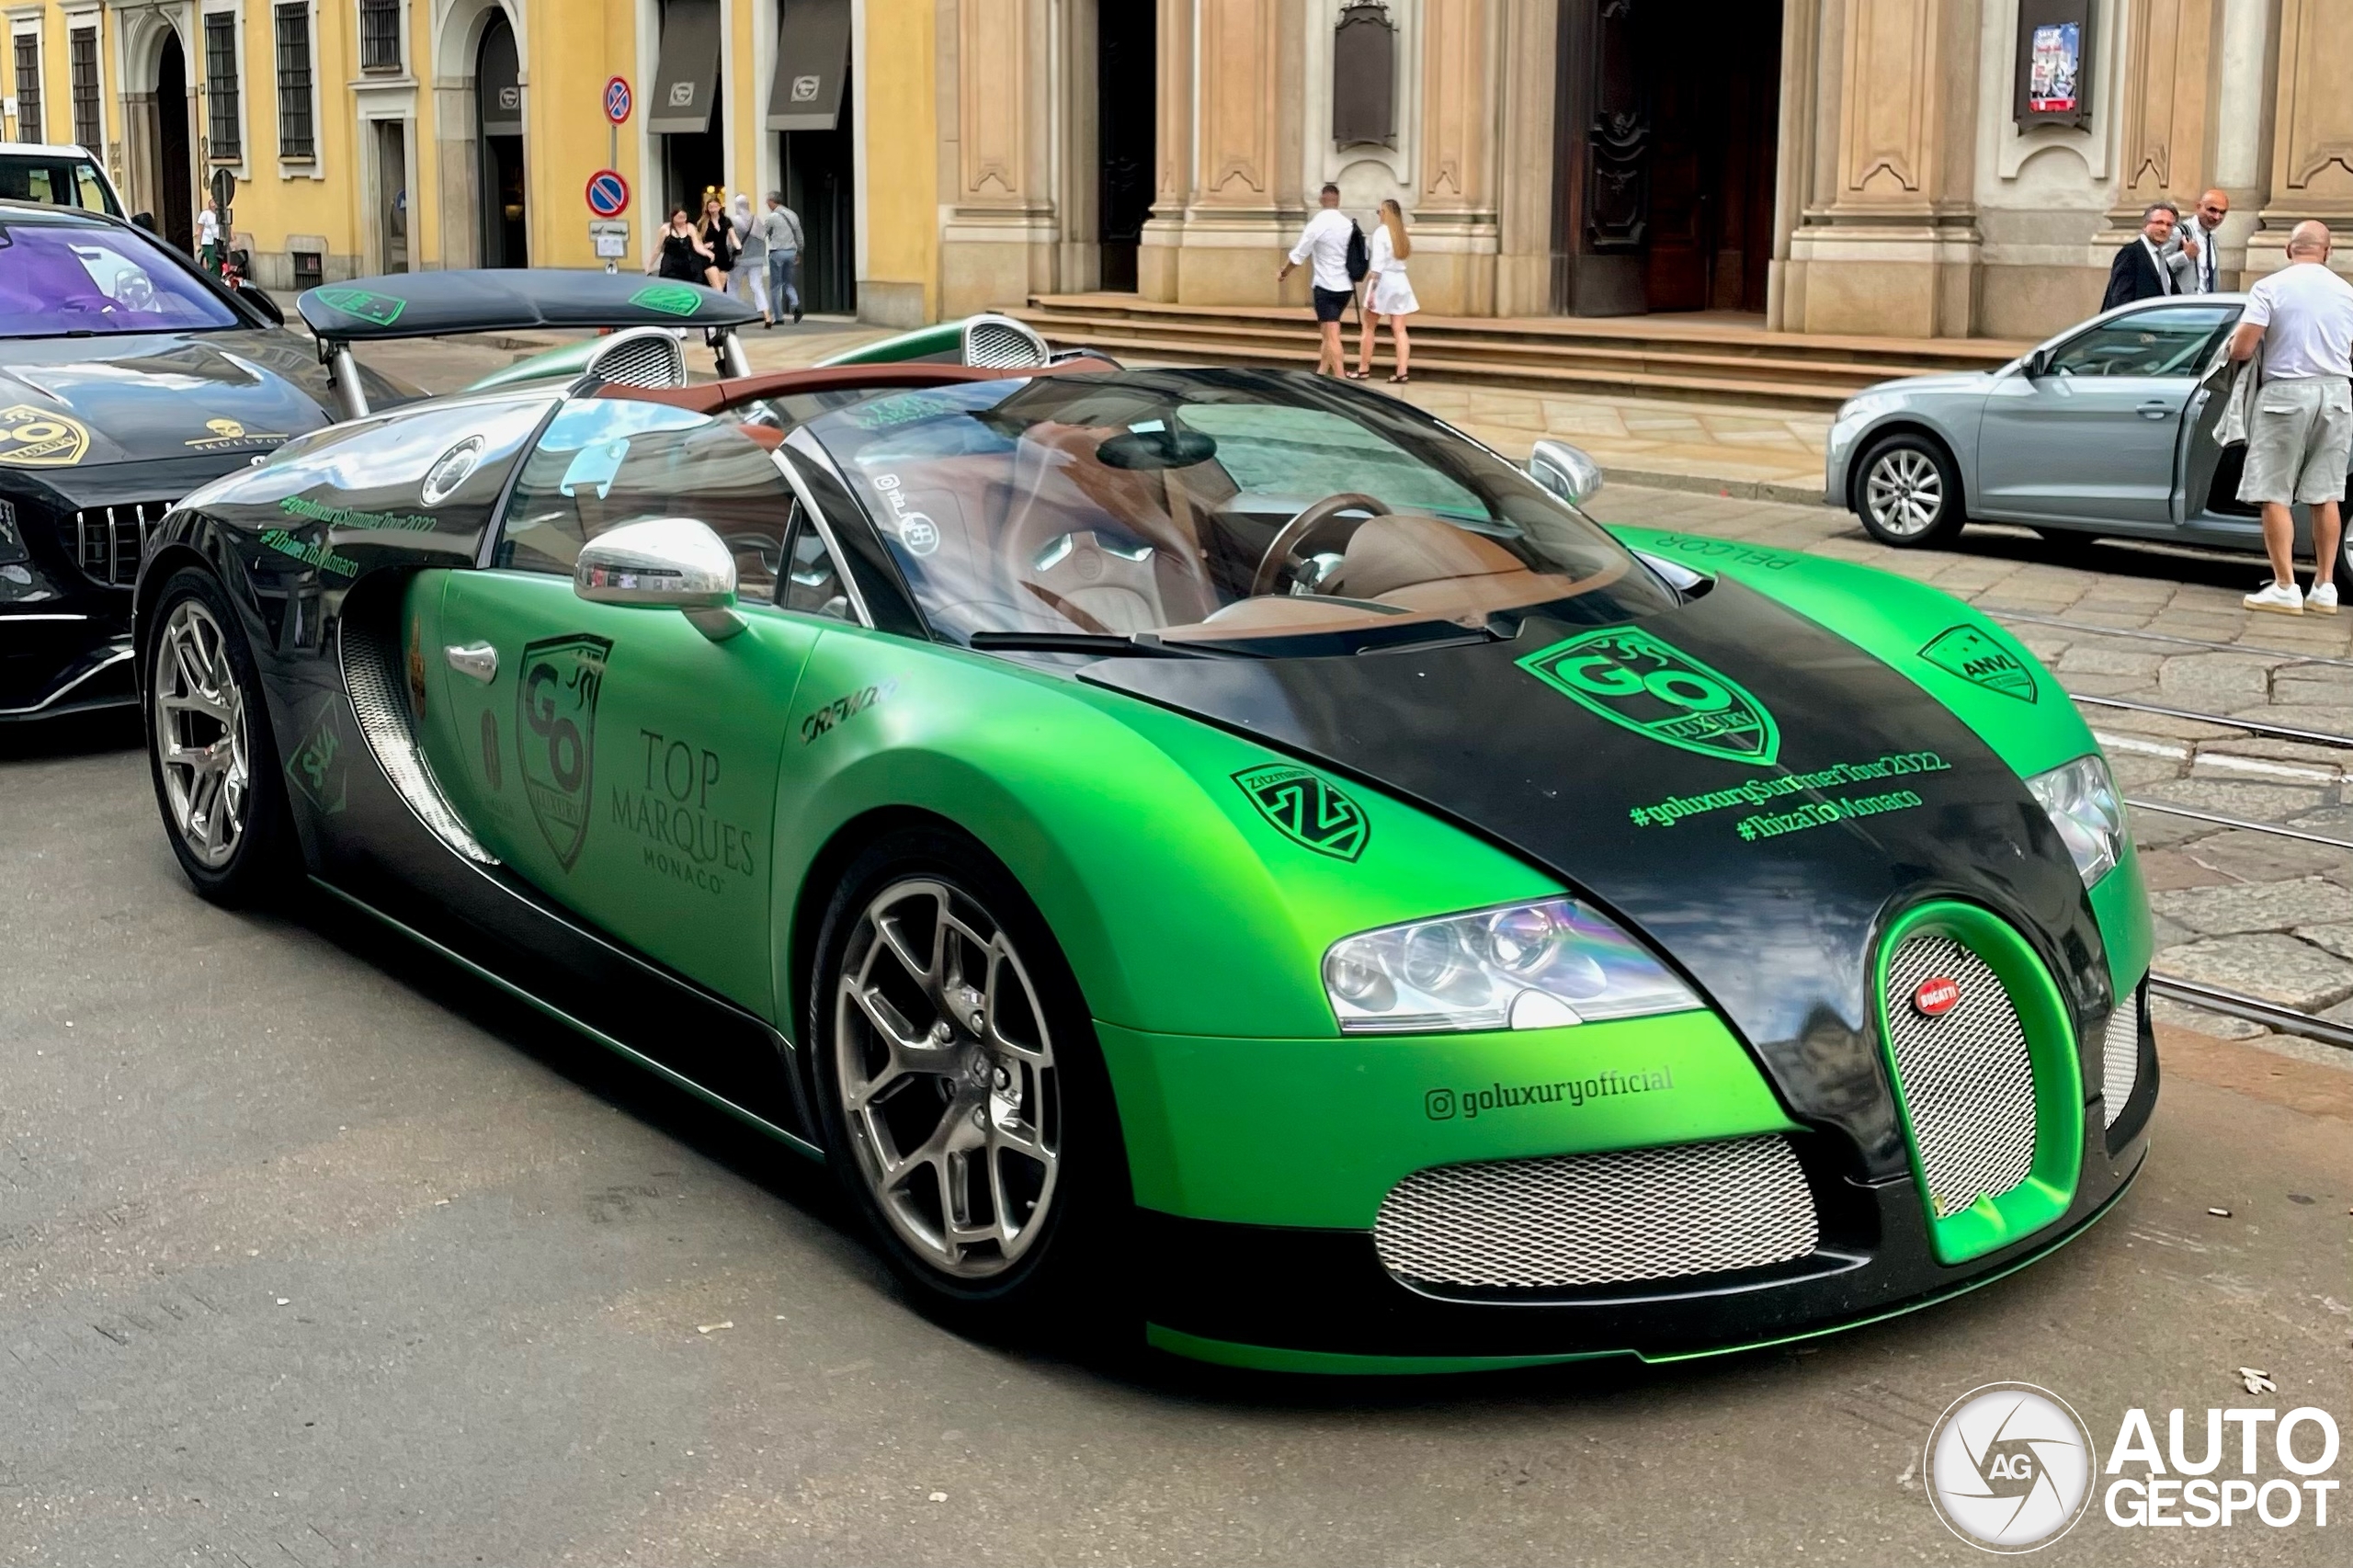 Veyron's identity crisis: A wrapping odyssey